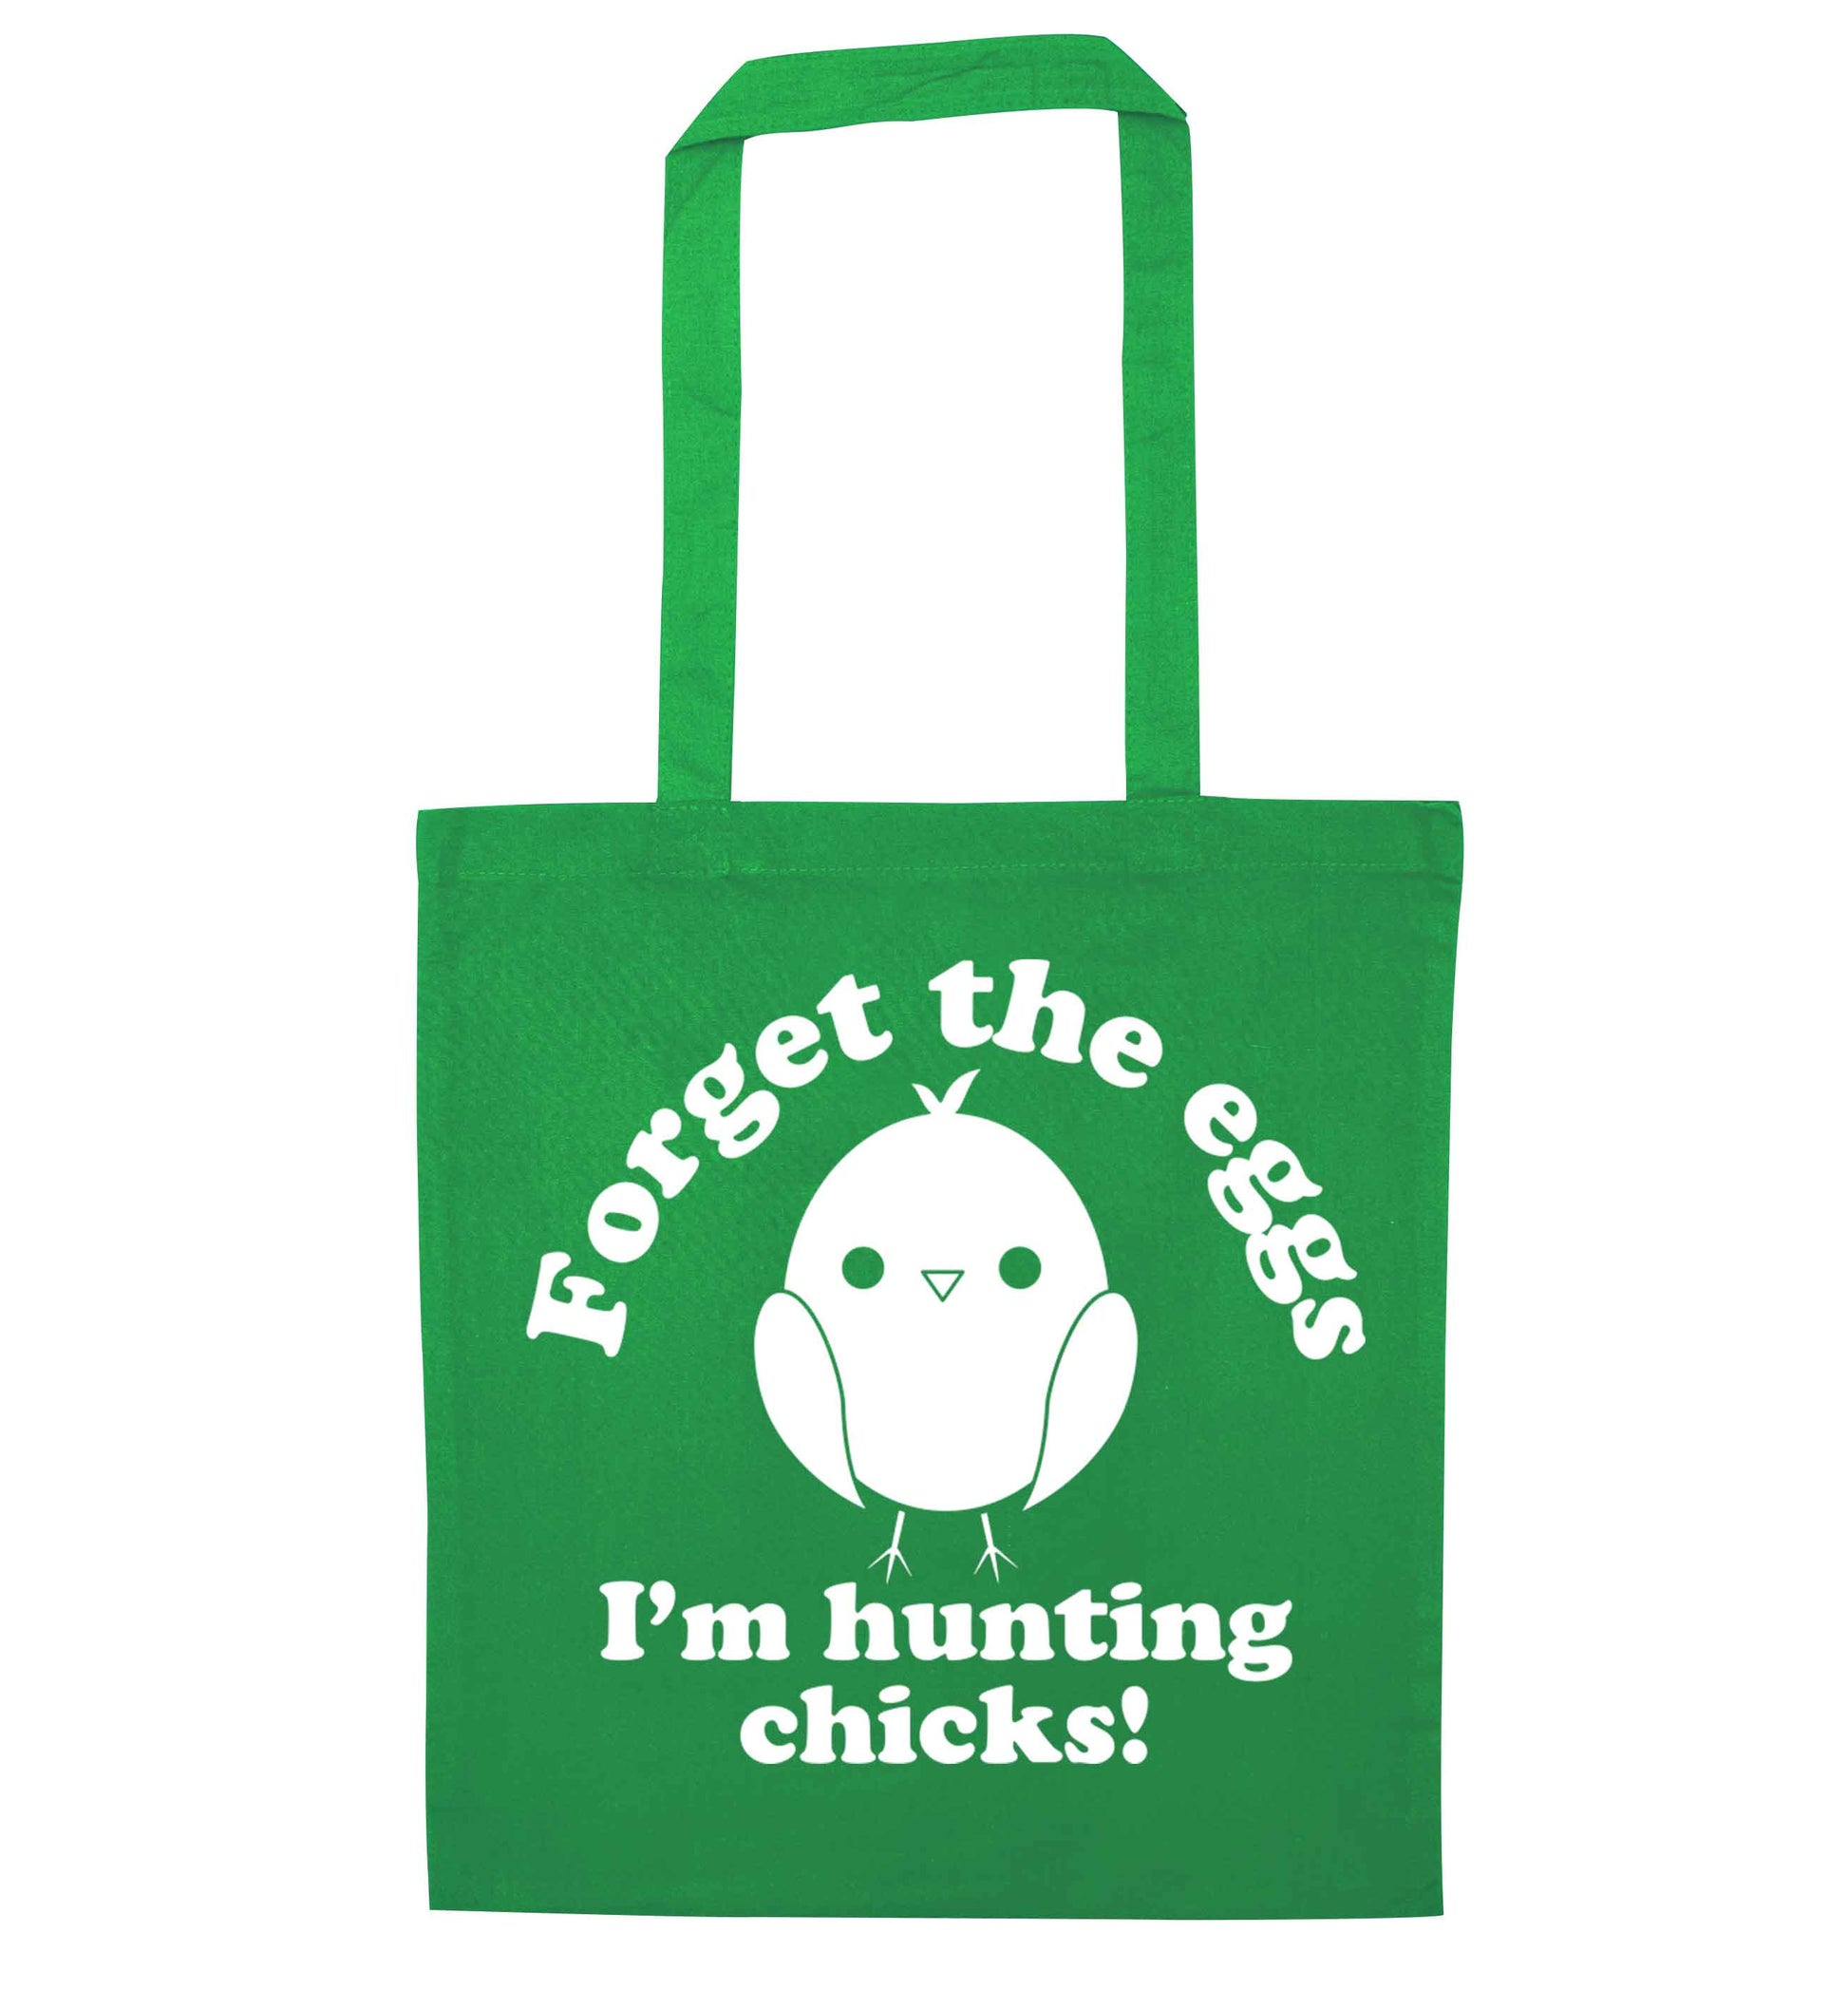 Forget the eggs I'm hunting chicks! green tote bag